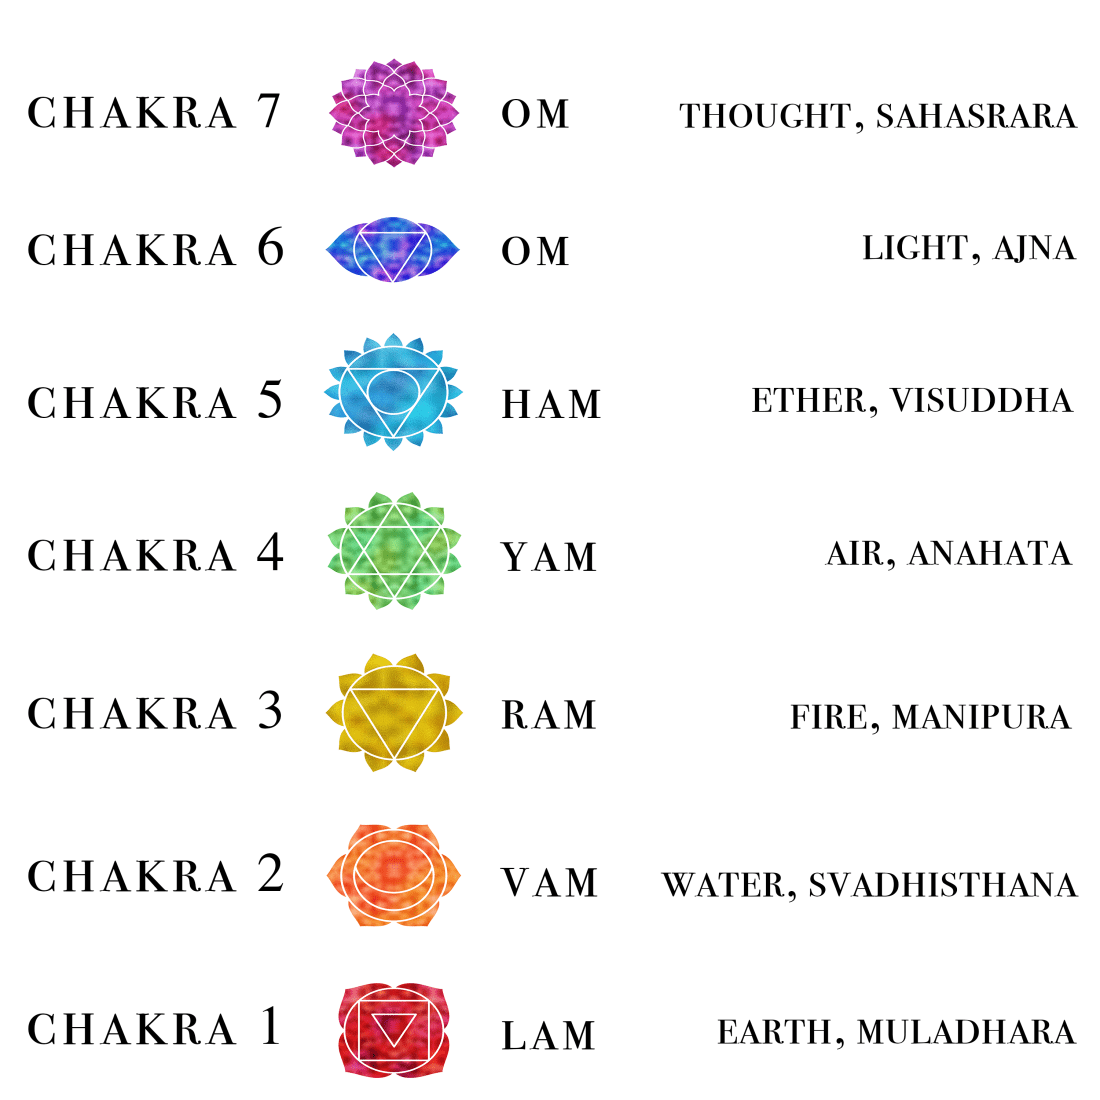 Each chakra has a special mantra that has been chanted by yogis for thousands of years.